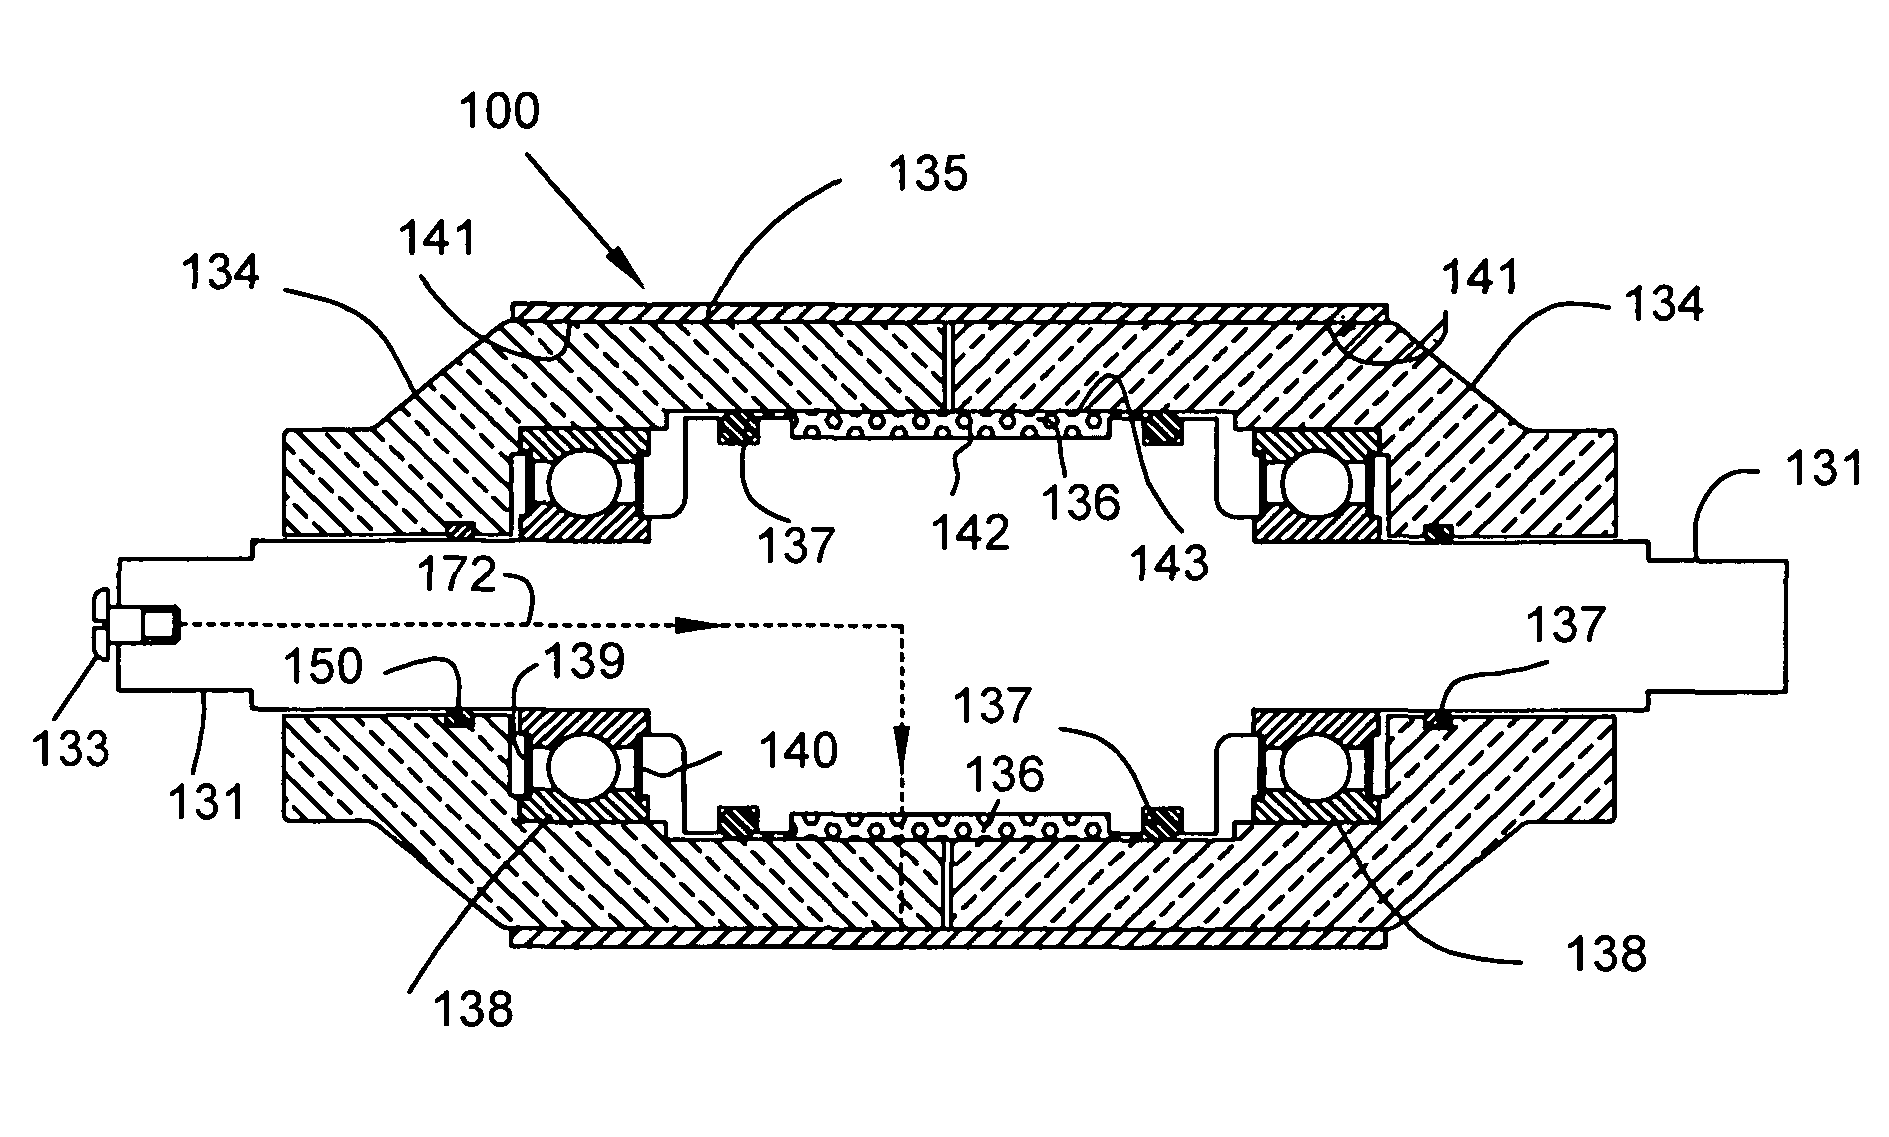 Apparatus for measuring insulation characteristics of coated steel sheet